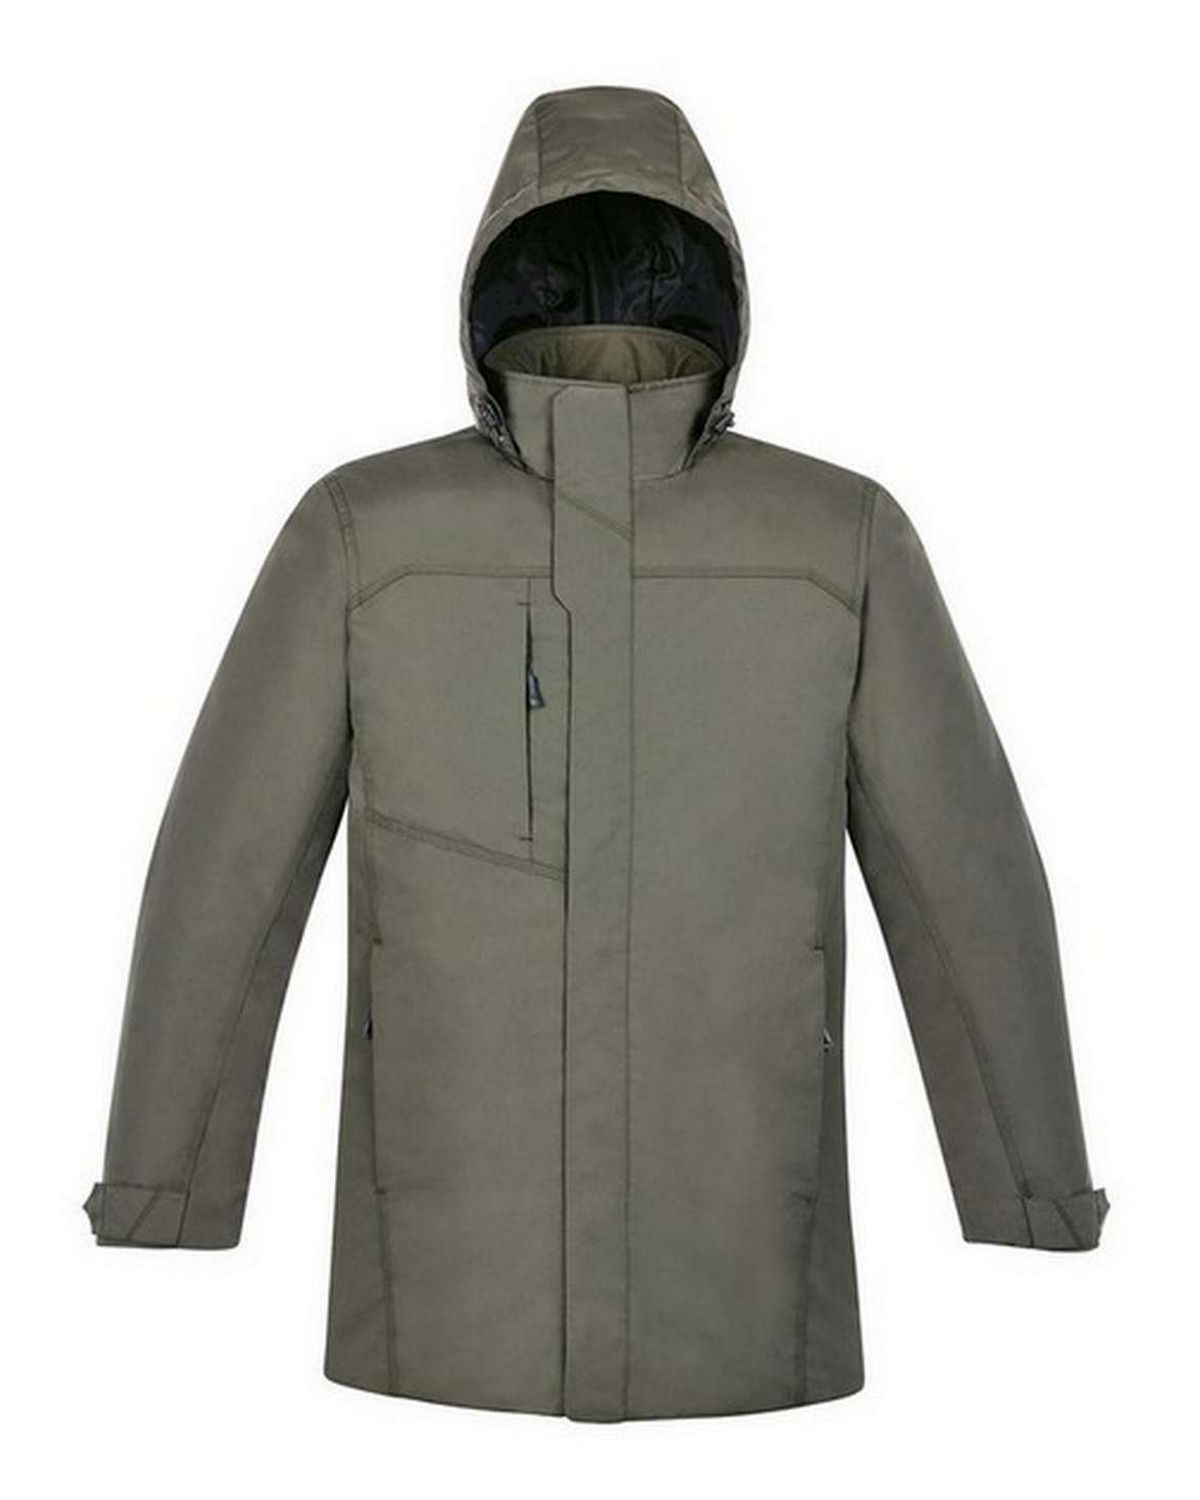 Buy North End 88210 Promote Mens Insulated Car Jacket